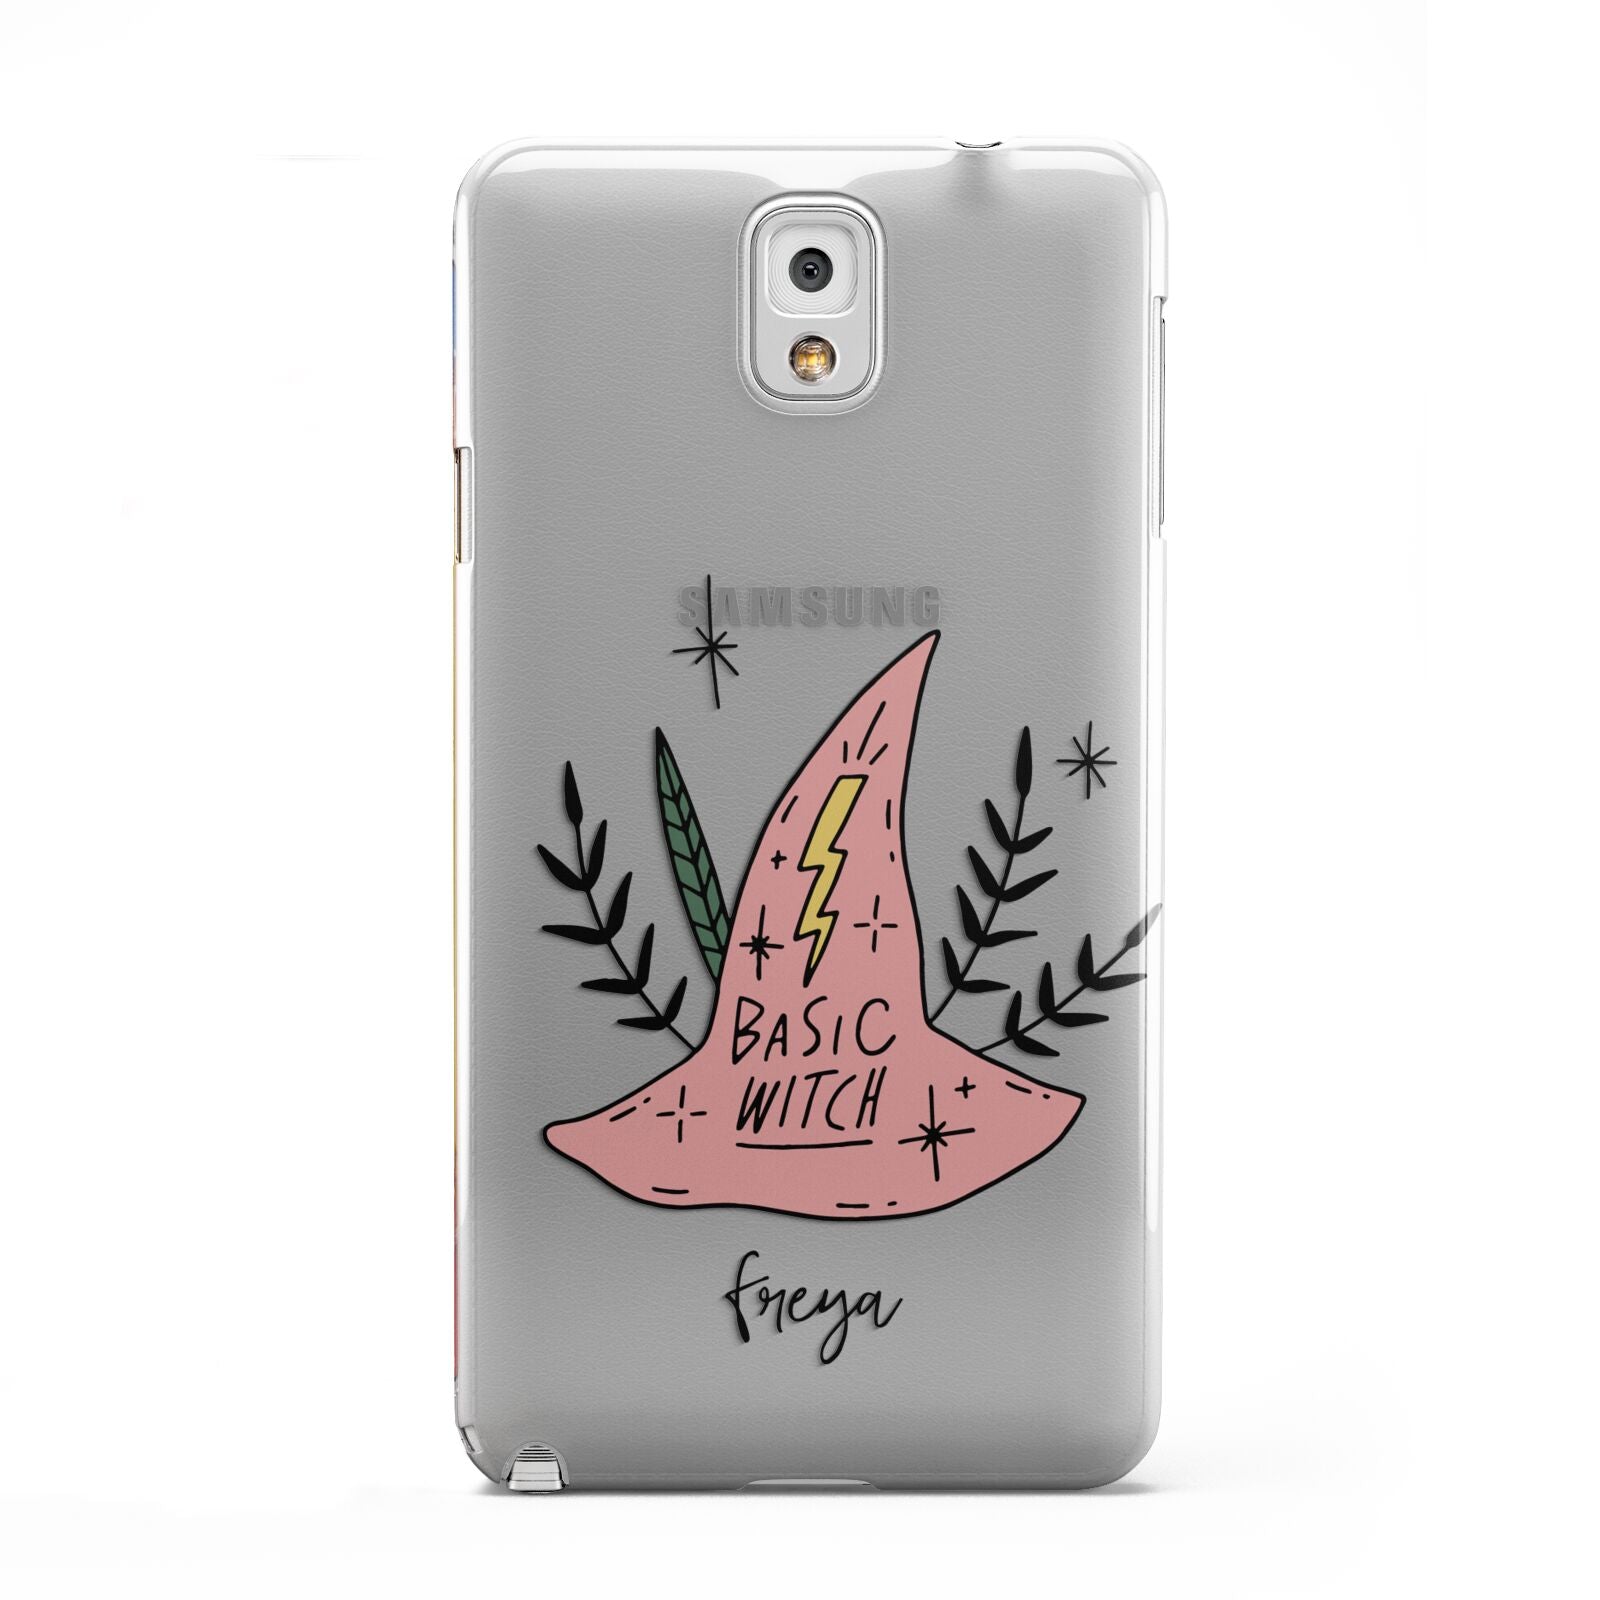 Basic Witch Hat Personalised Samsung Galaxy Note 3 Case